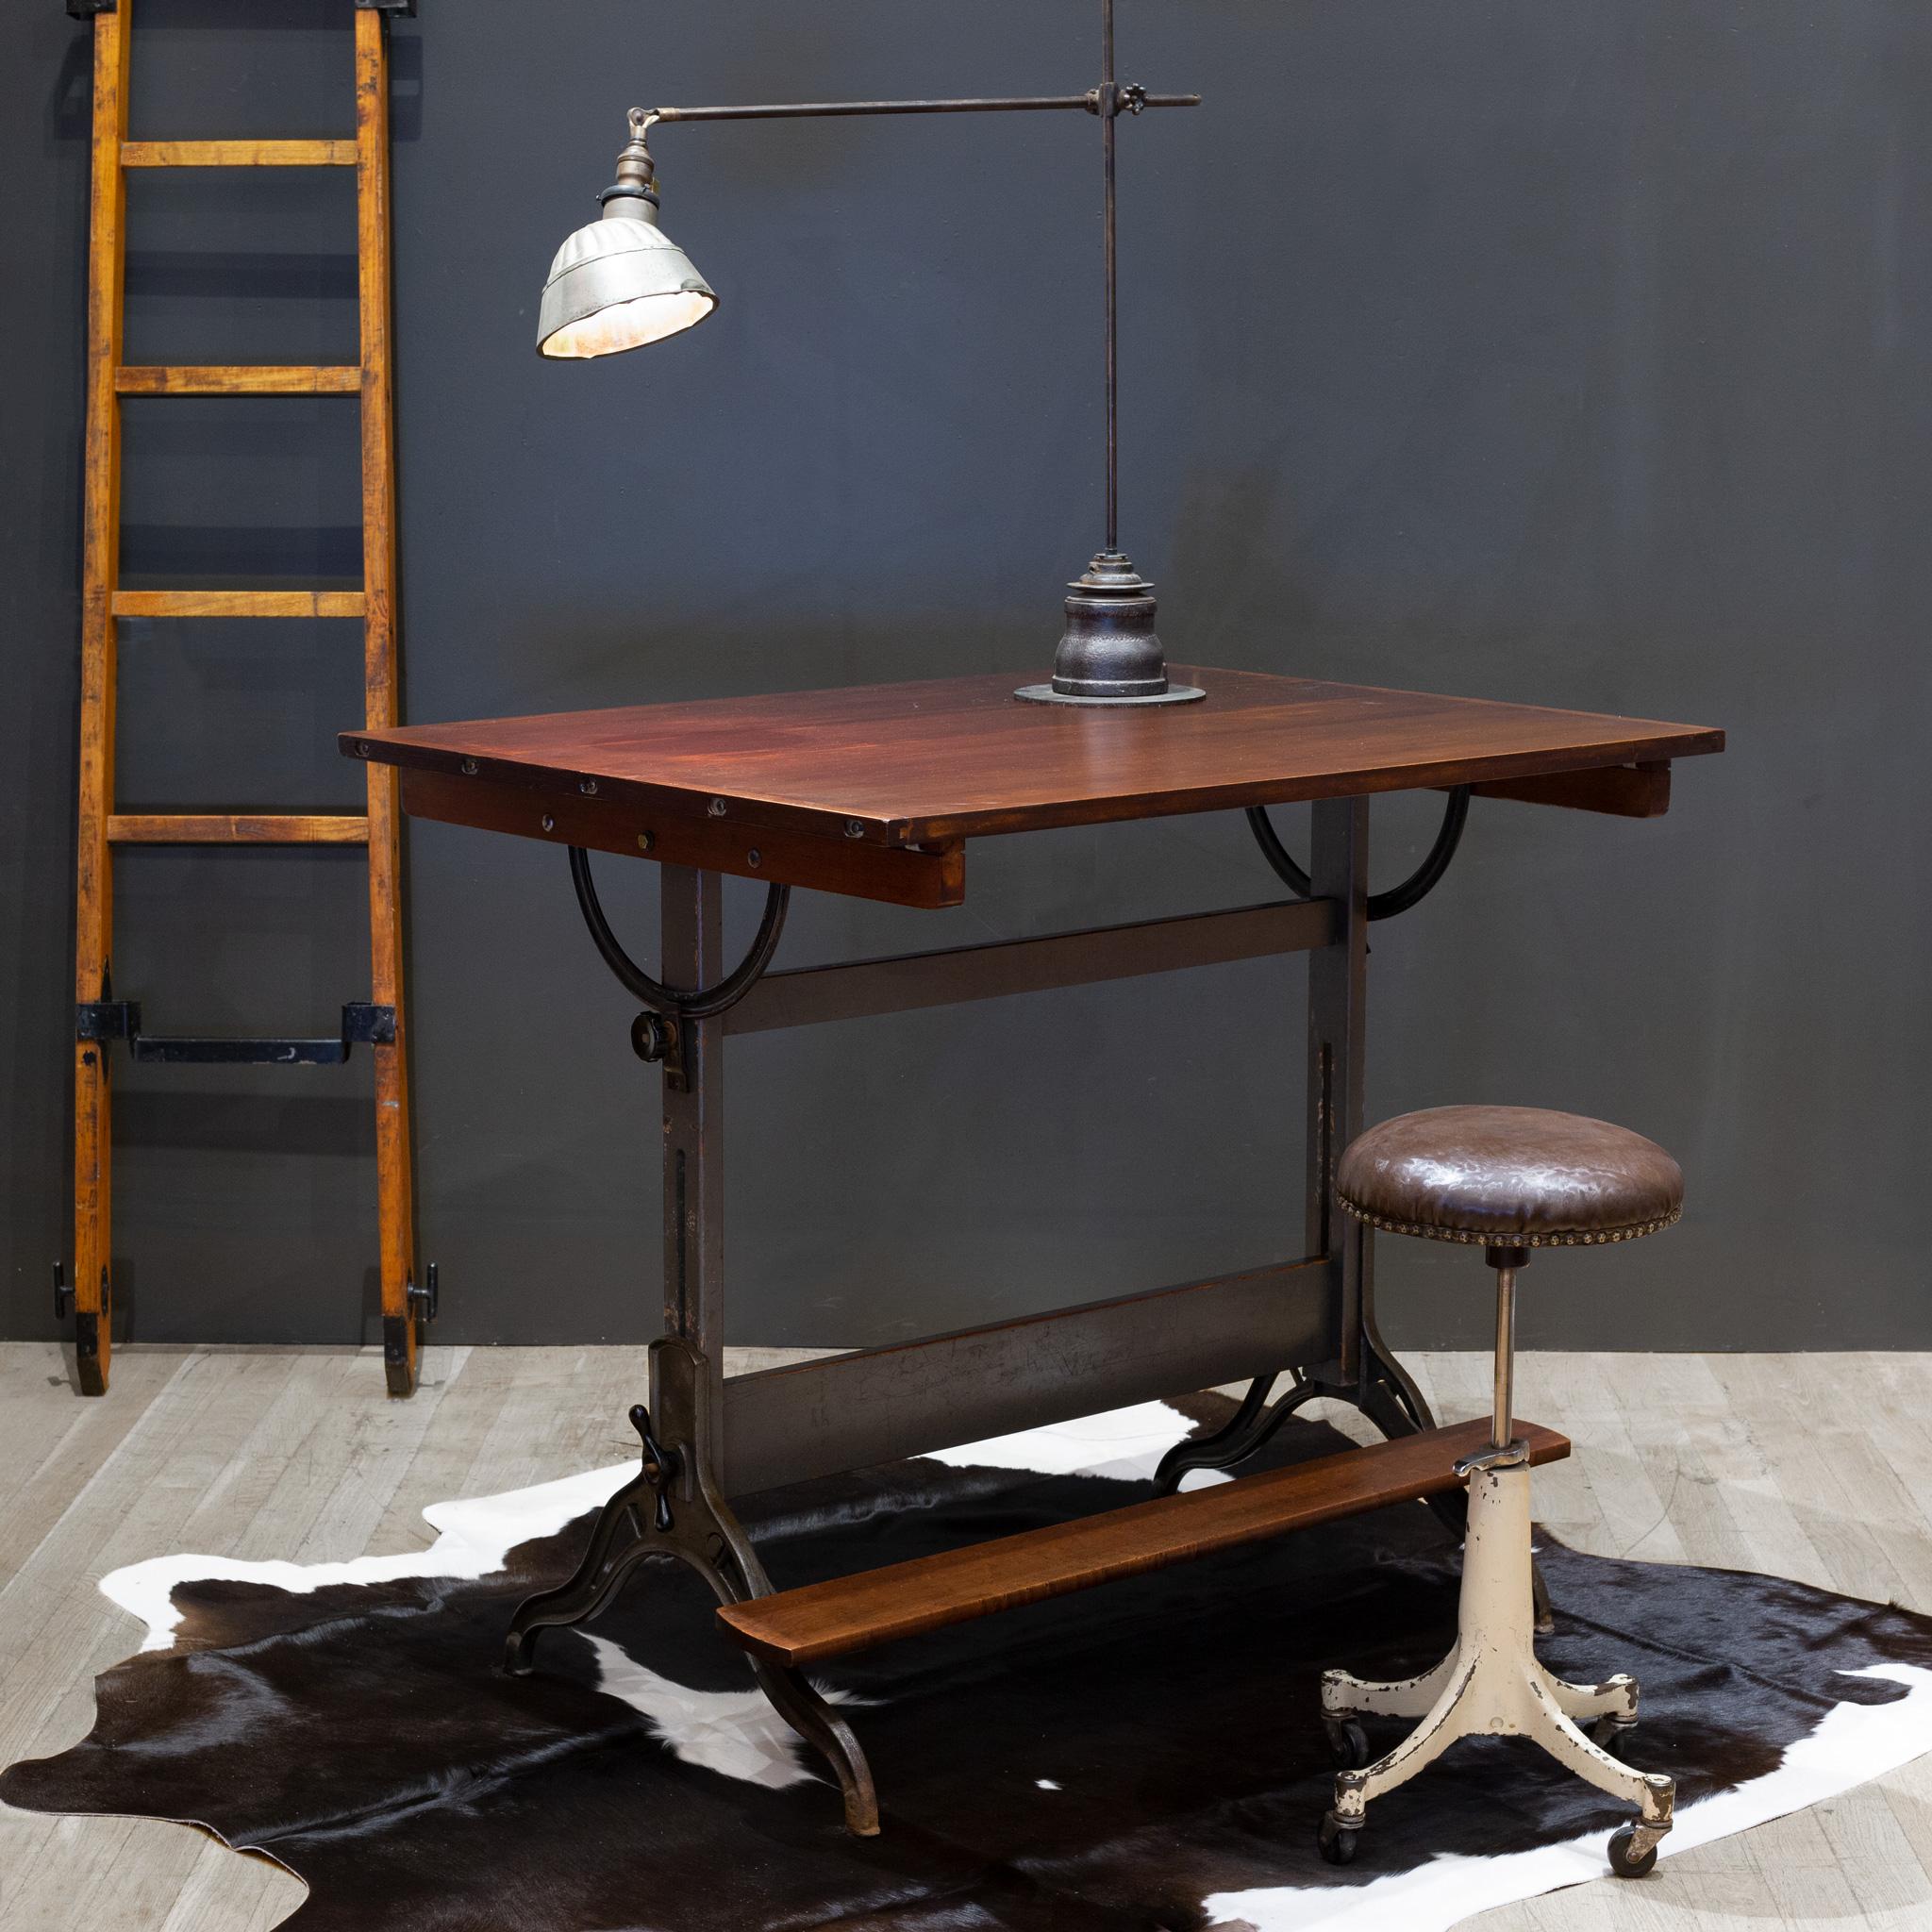 ABOUT

Contact us for more affordable shipping options: S16 Home San Francisco. 

A fully adjustable industrial drafting table with solid Maple top, wooden base and solid cast iron black knobs. Original brass Hamilton Mfg. Co. label. Painted grey